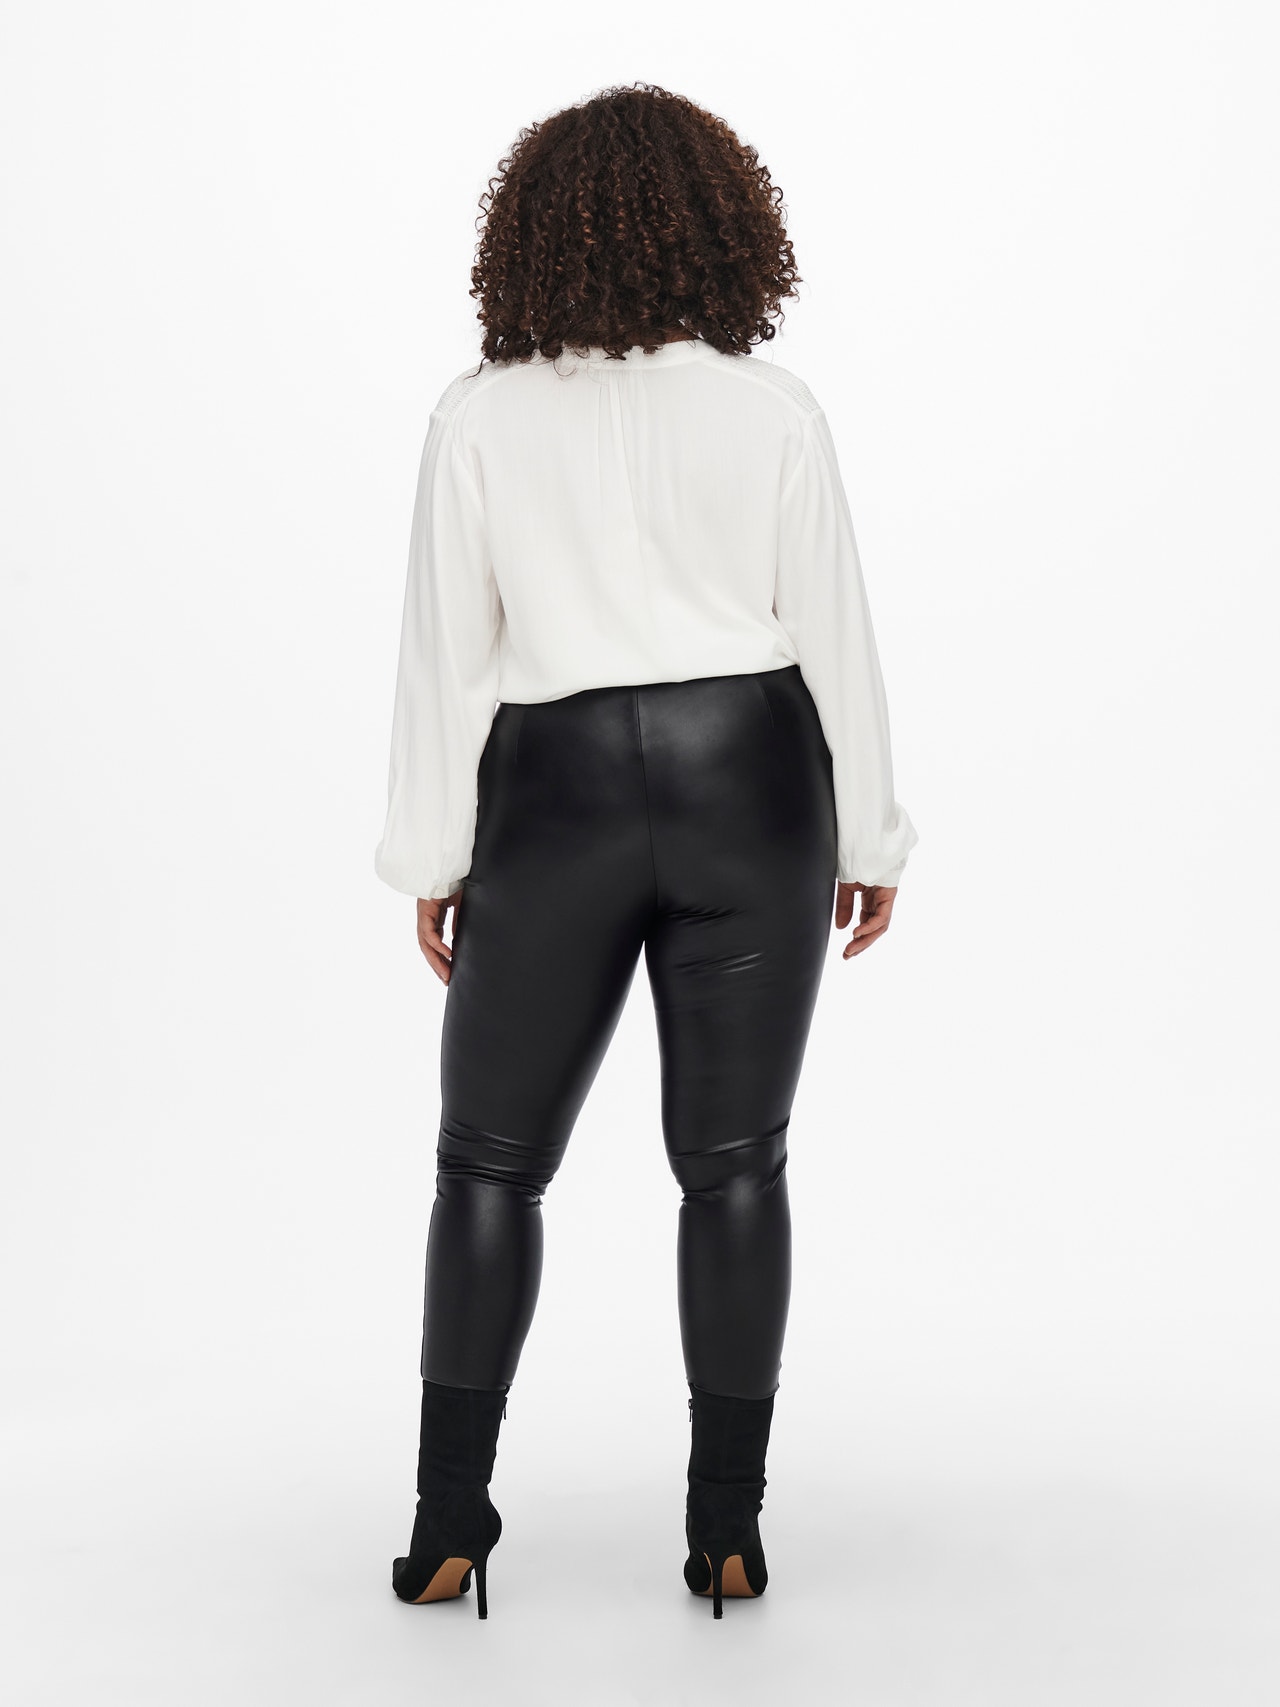 Curvy faux Leather Leggings with 20% discount!